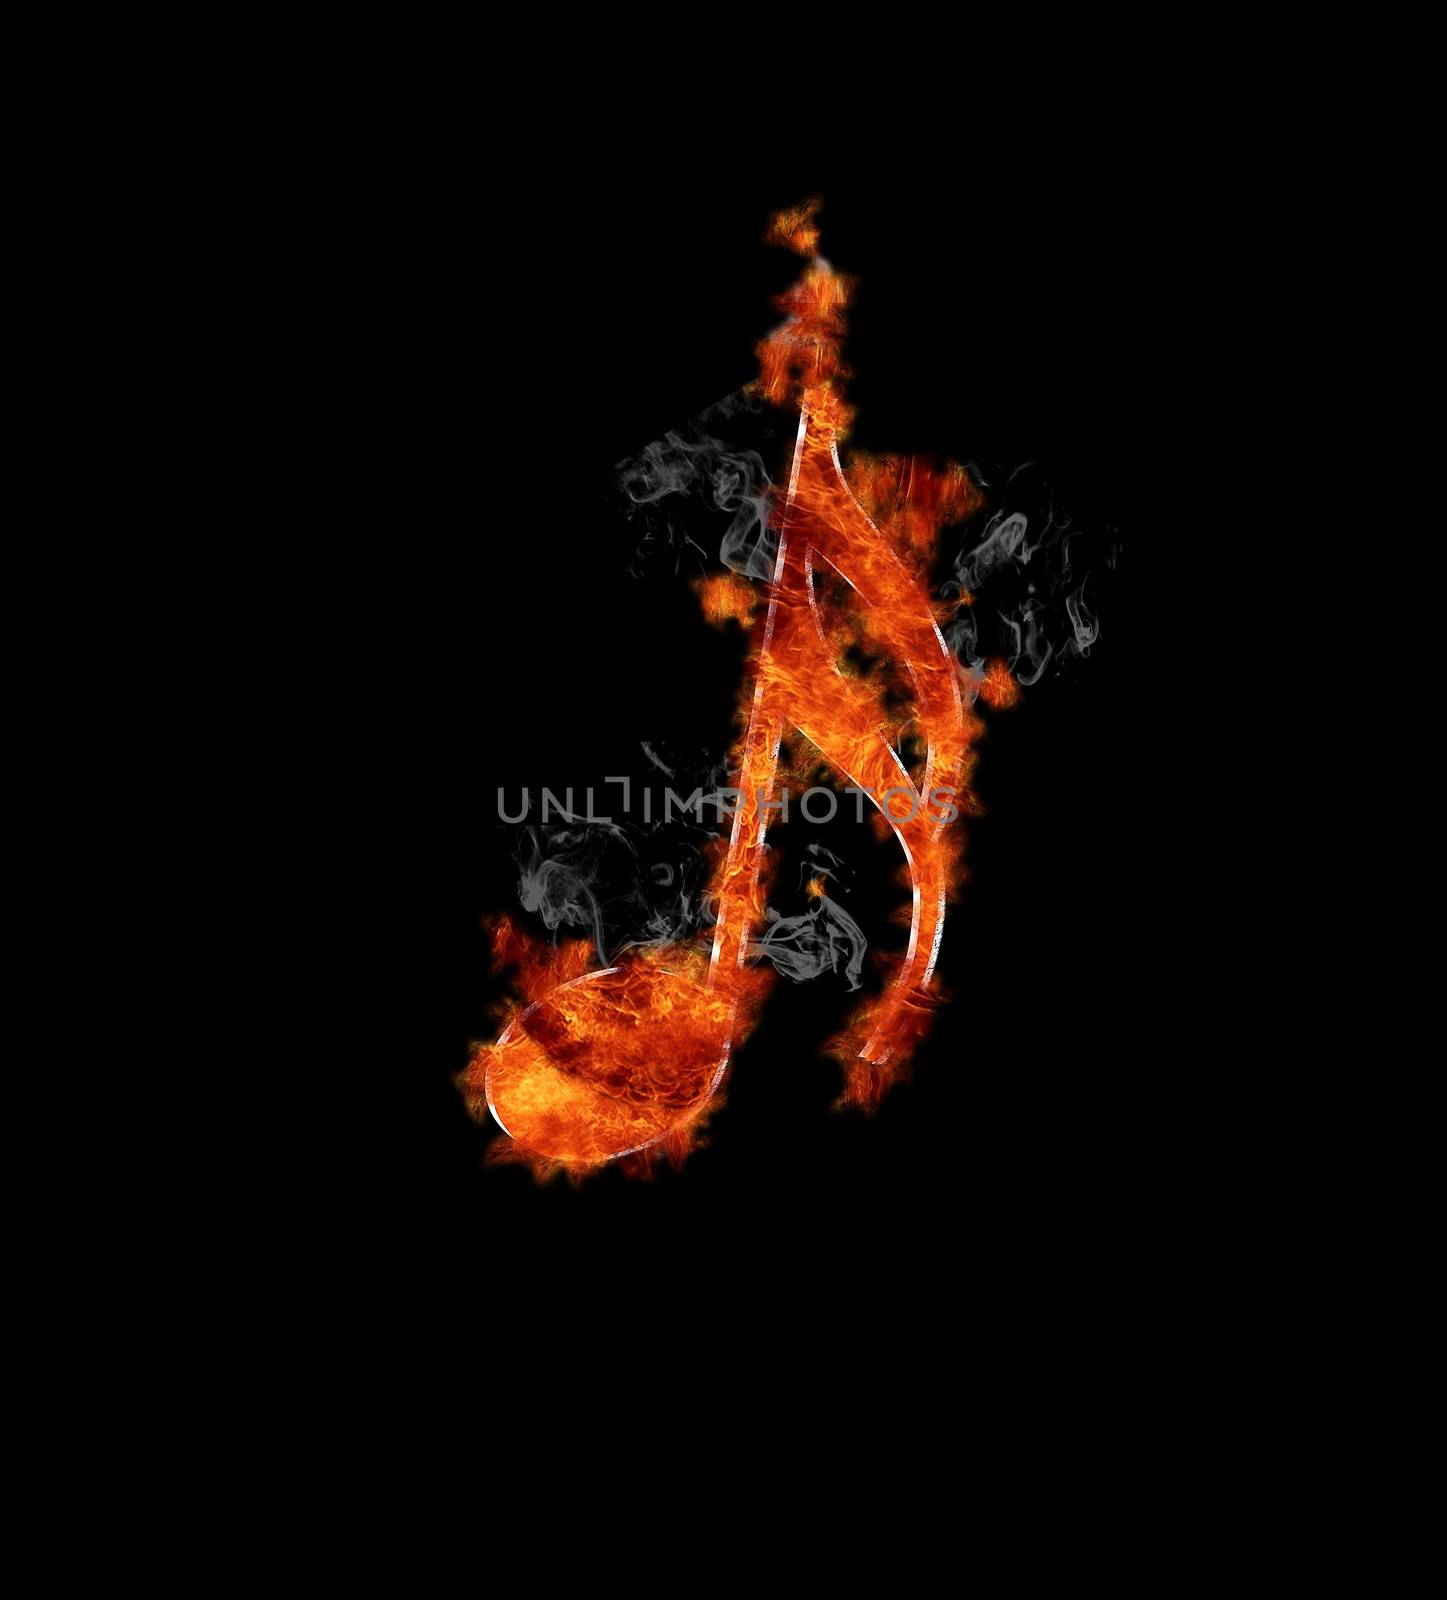 Musical note on fire. by CreativePhotoSpain